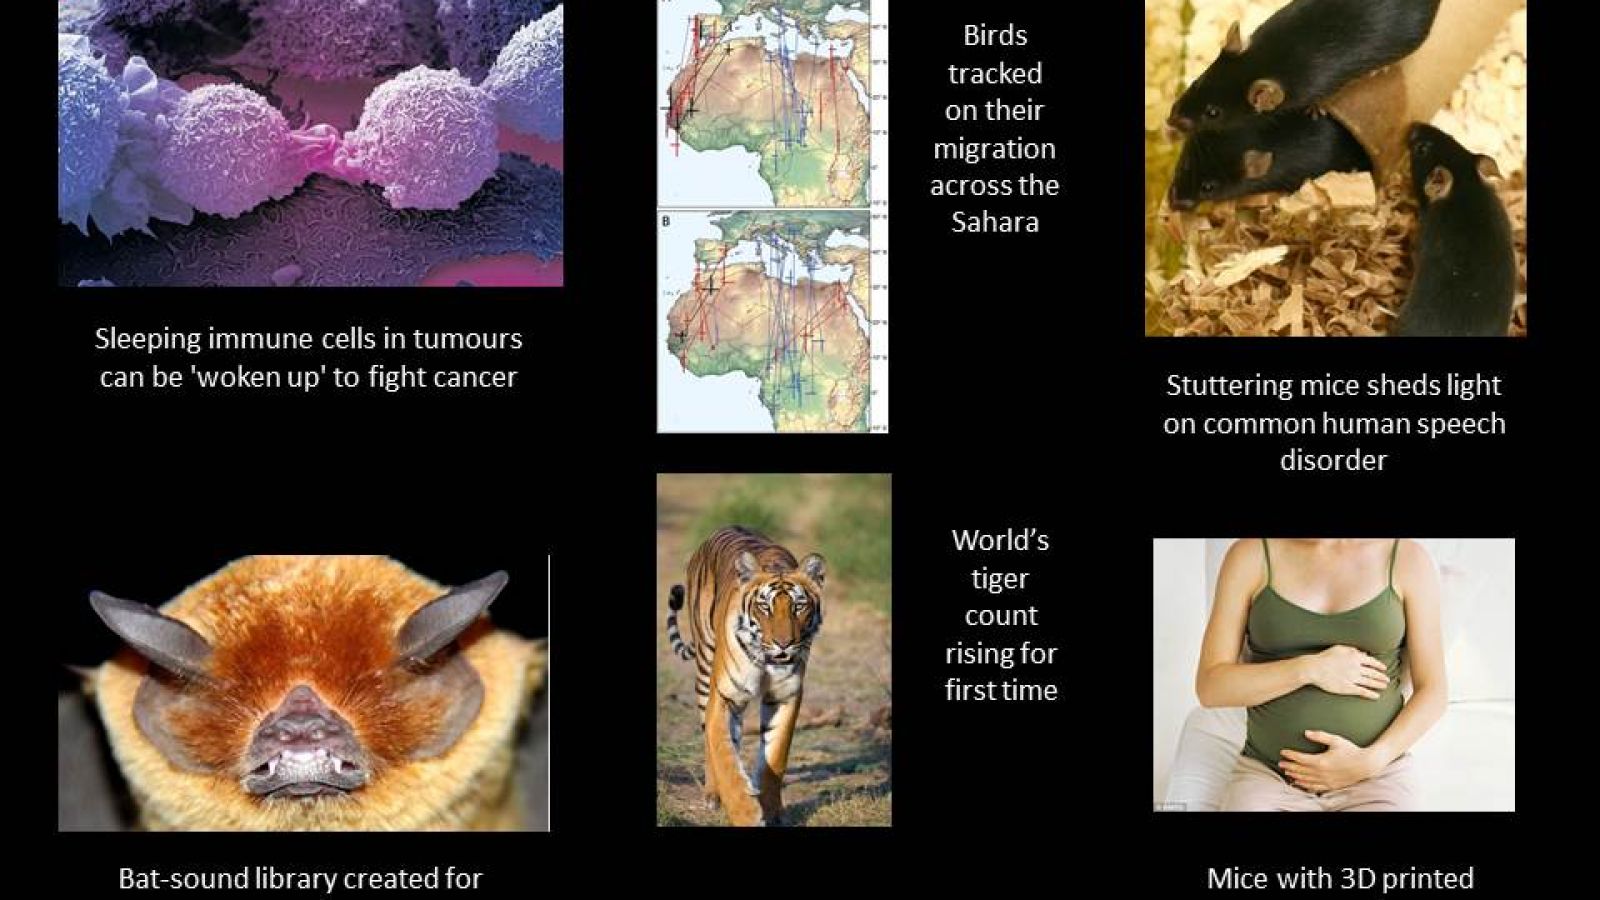 Tiger numbers up :: Understanding Animal Research